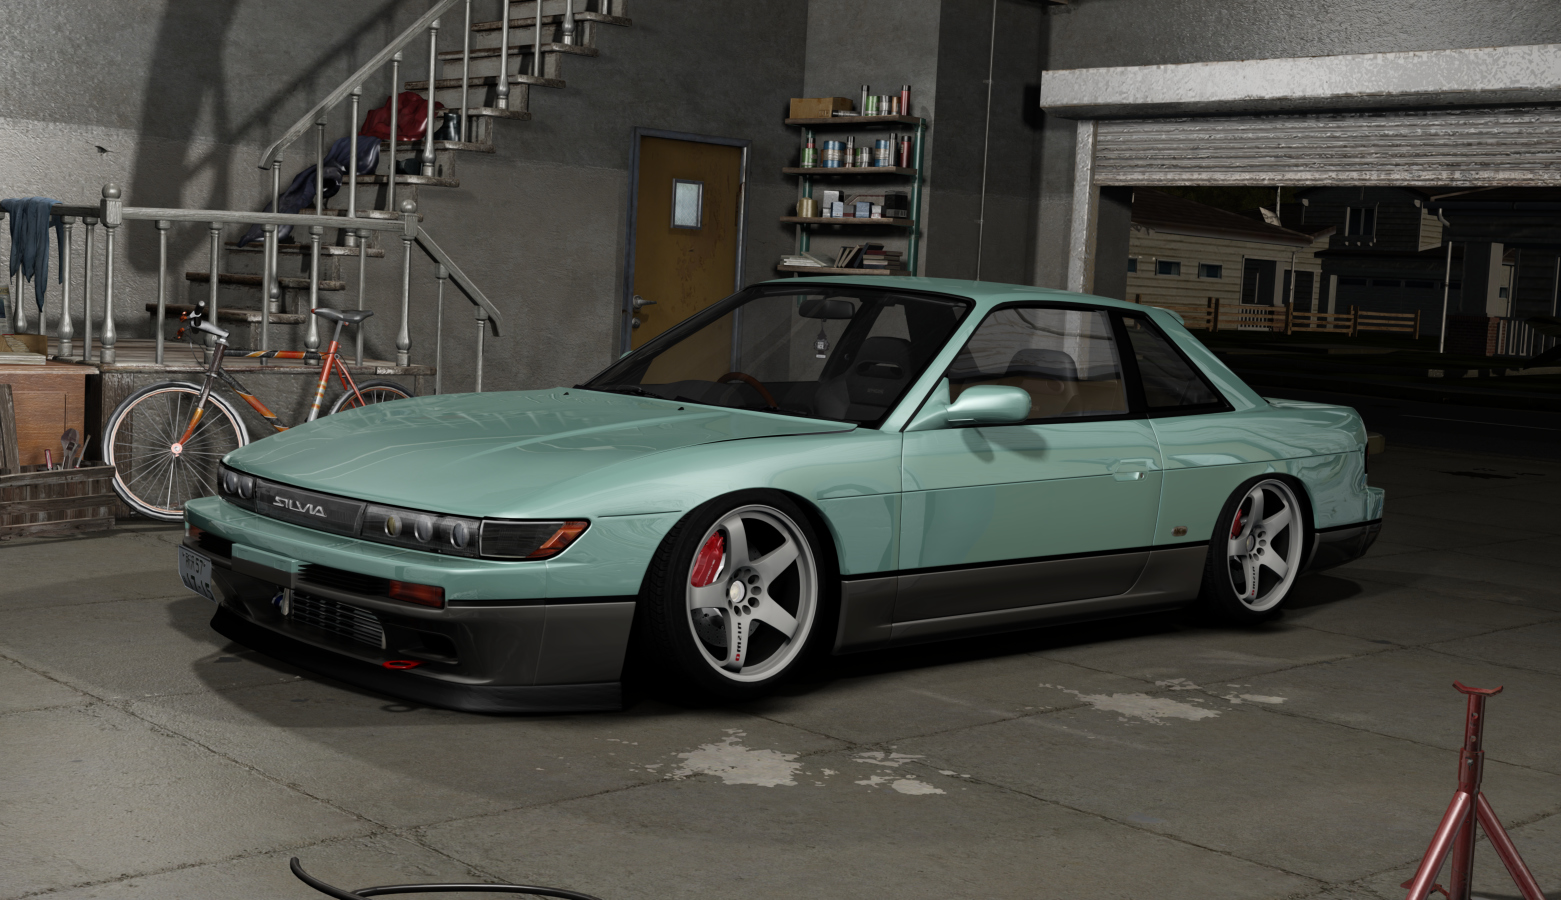 DWG Nissan Silvia S13 Preview Image